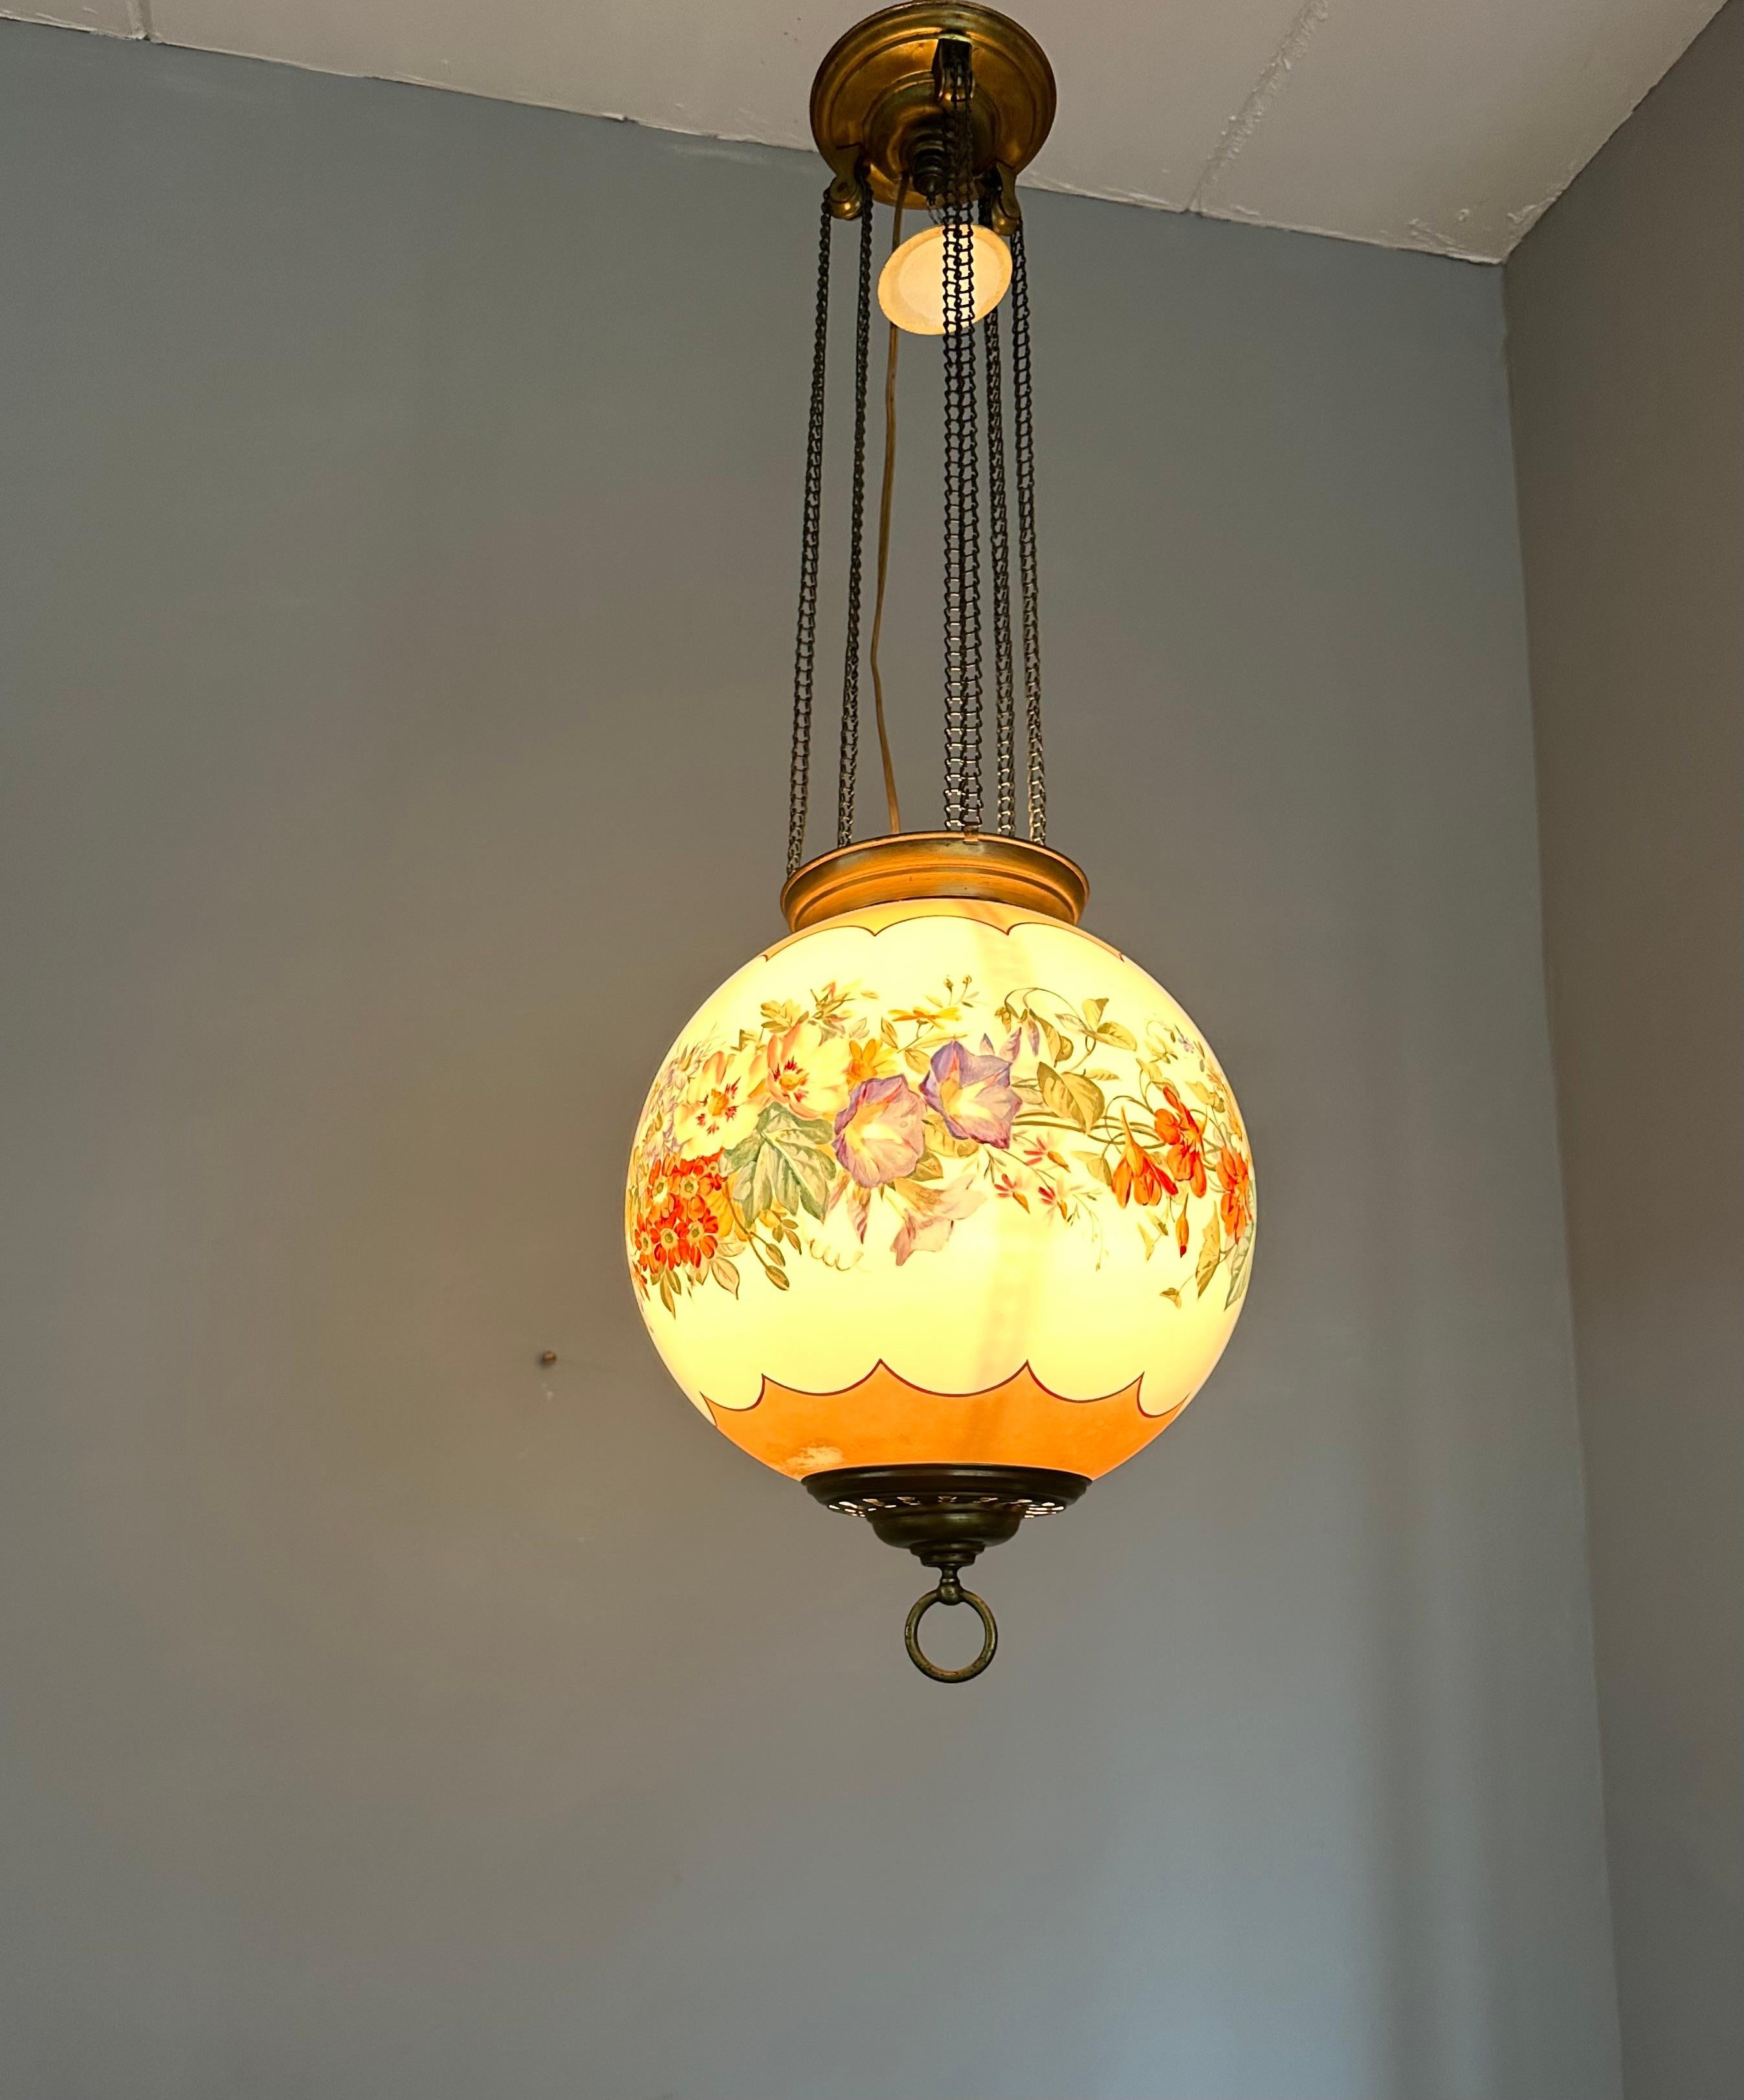 Antique Round Opaline Glass Shade Pendant Light with Wreath of Flowers Decor For Sale 6